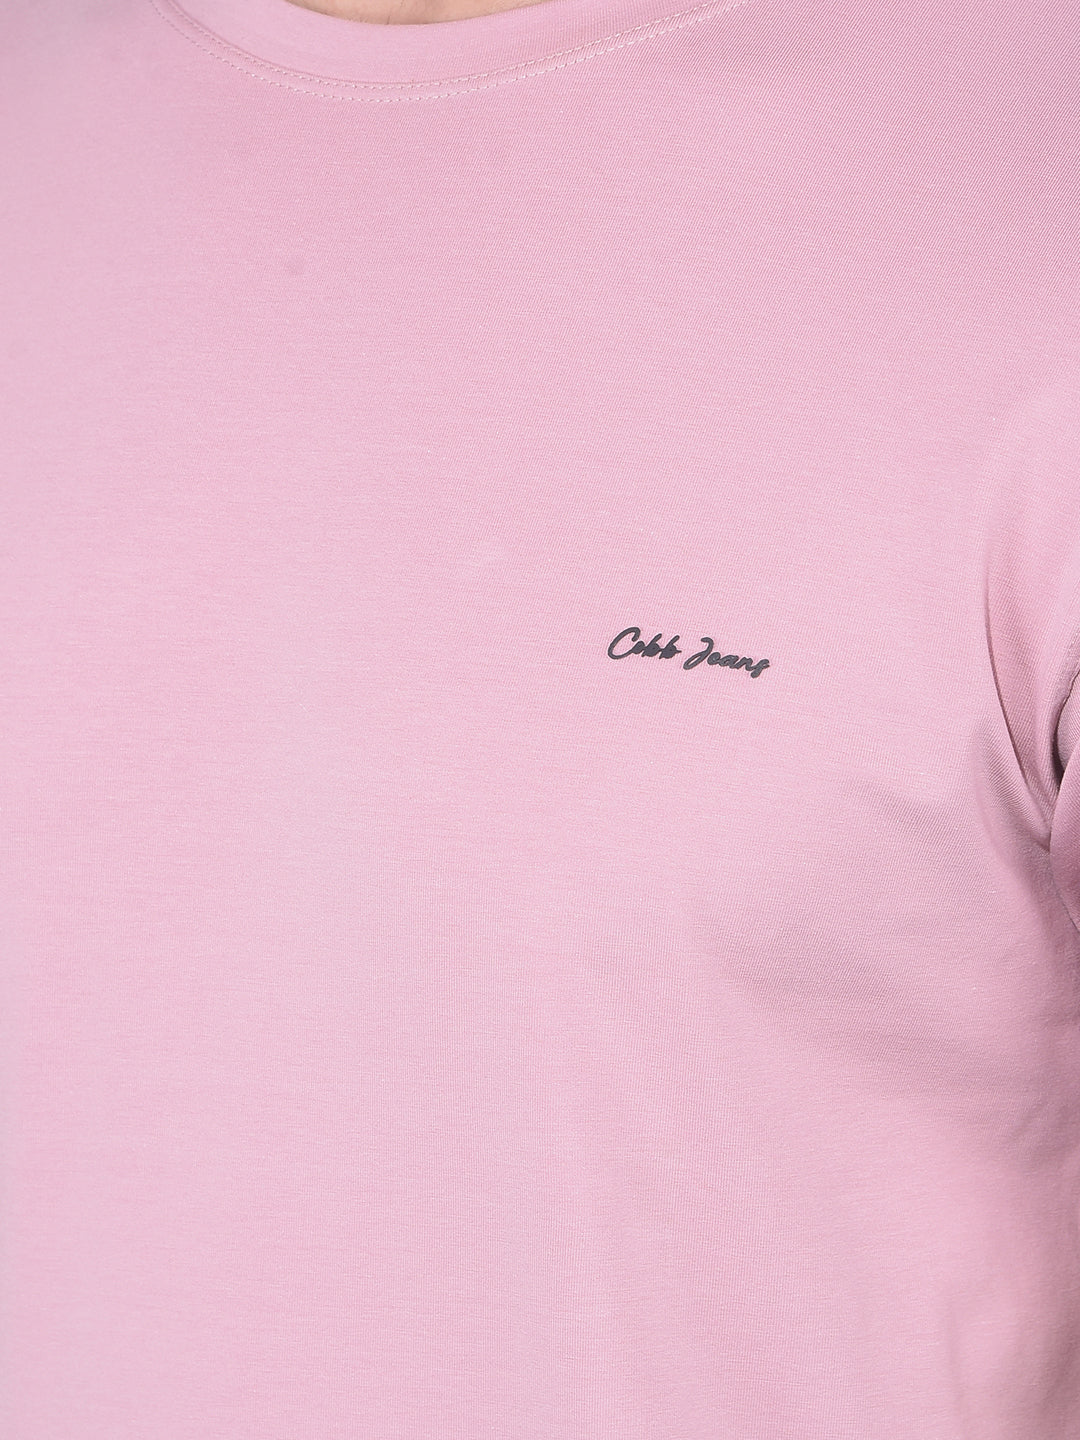 COBB SOLID CREPE PINK ROUND NECK T-SHIRT